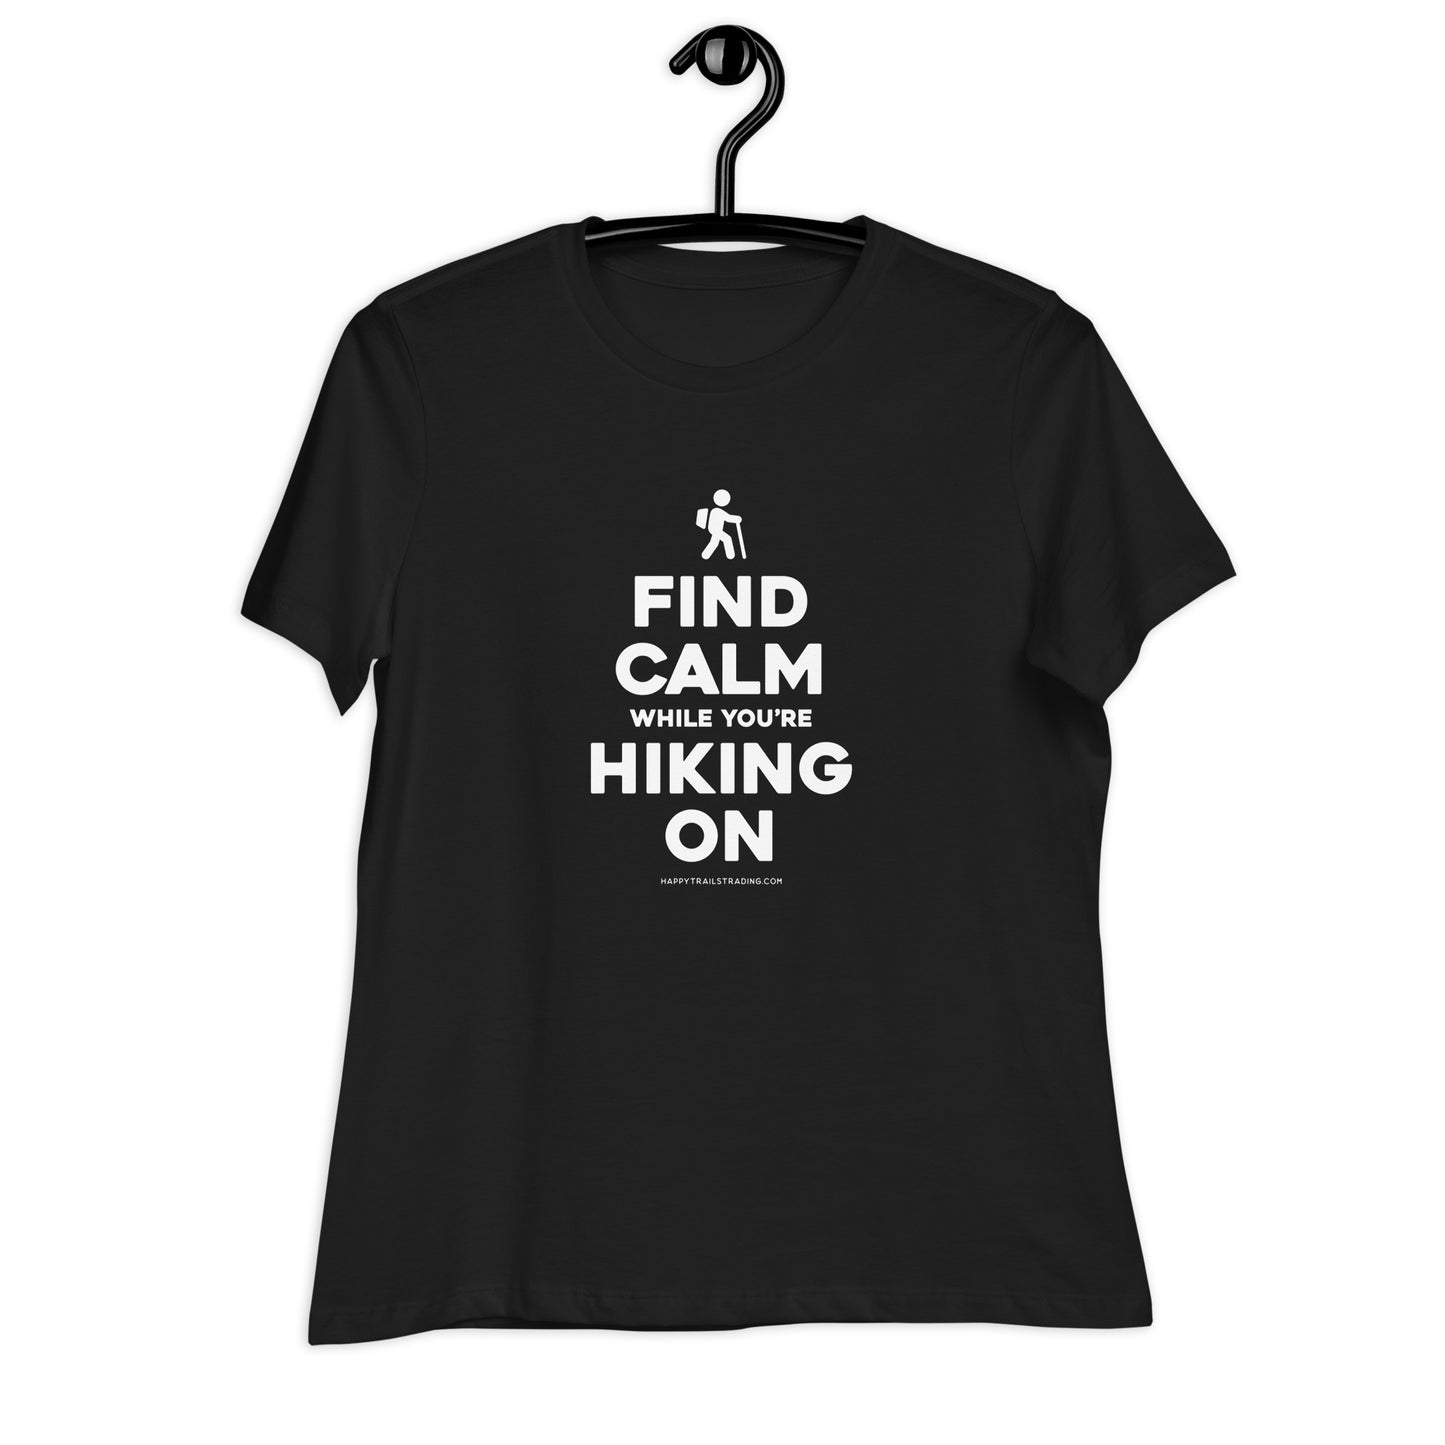 Find Calm While You're Hiking On - Women's Relaxed T-Shirt